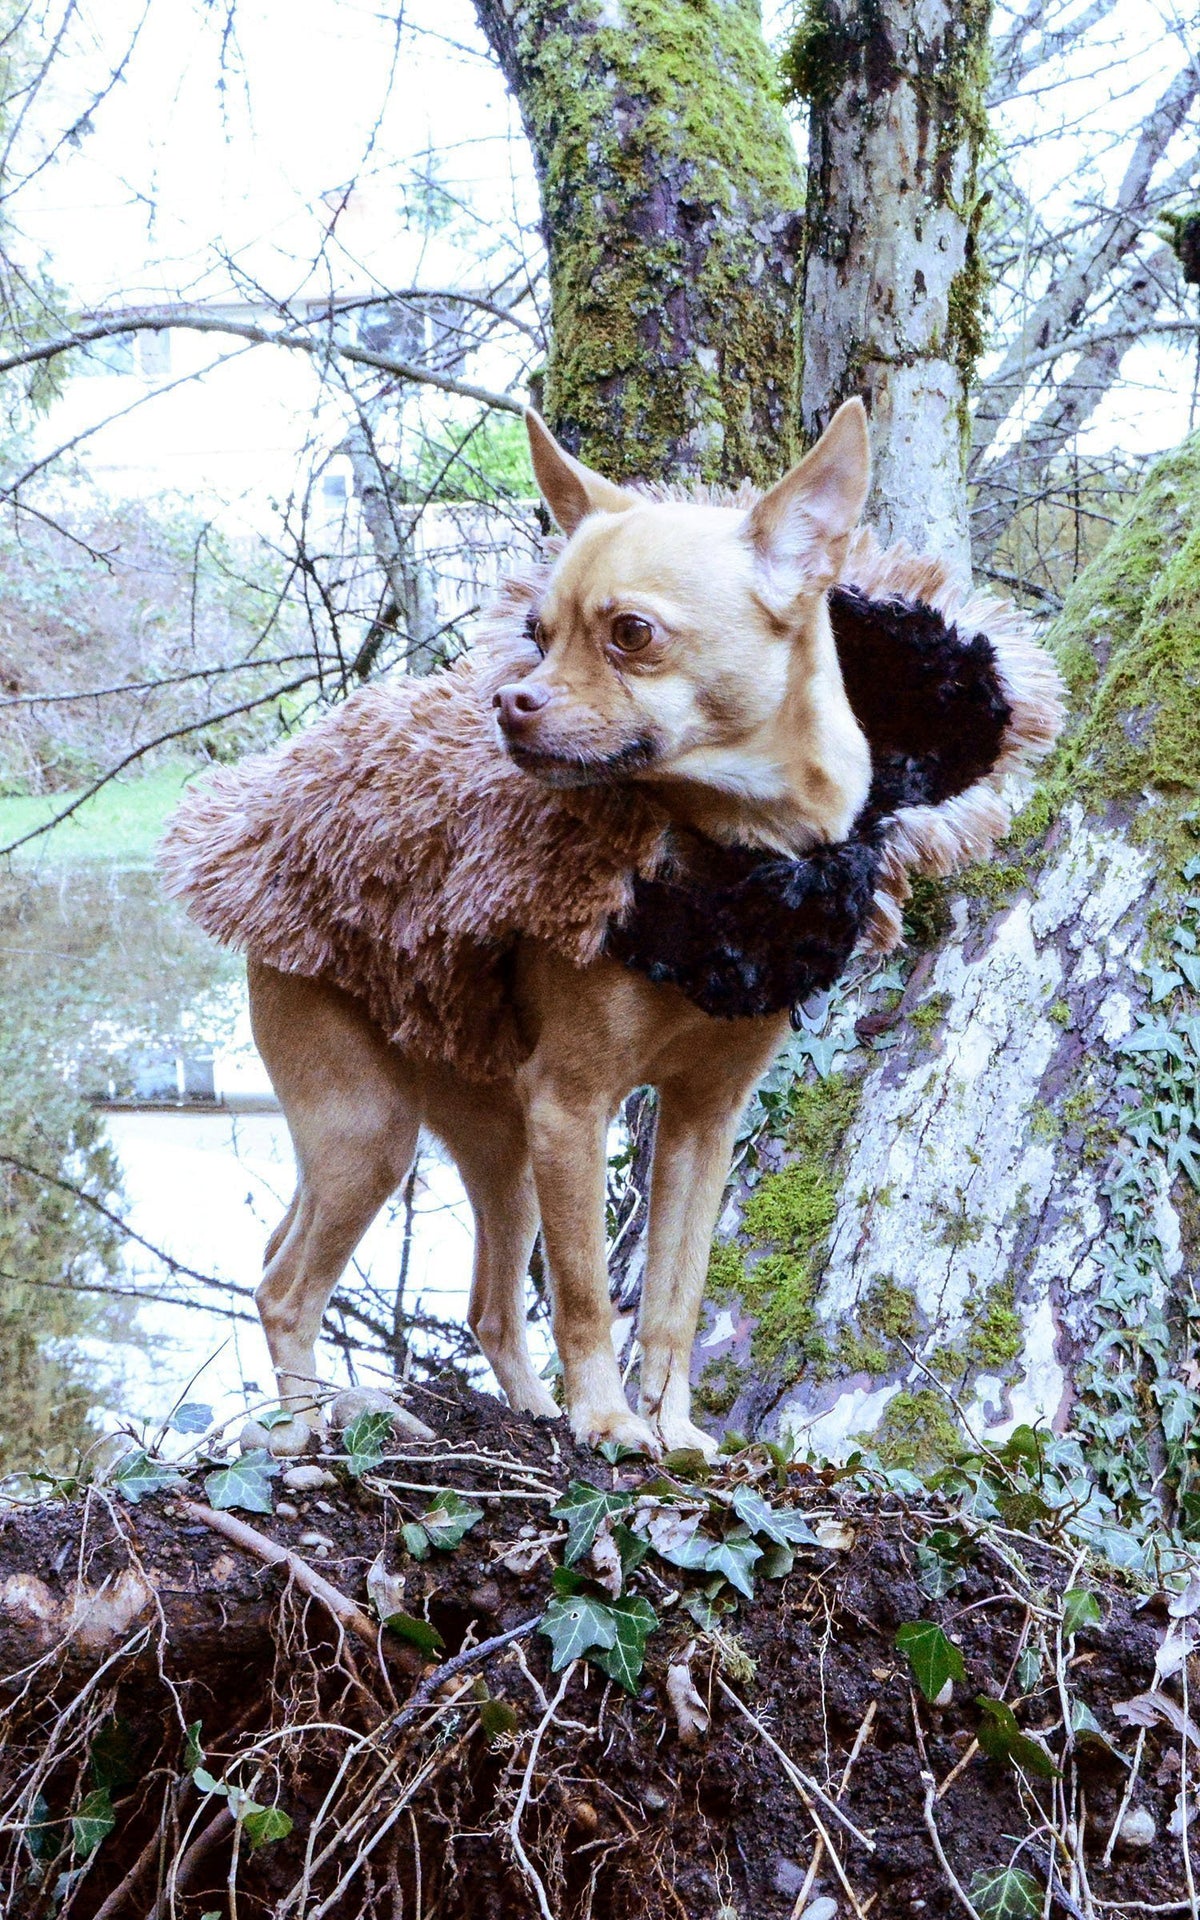 Chihuahua wearing Designer Handmade reversible Dog Coat standing in front of tree by lake | Red Fox Long hair Luxury Faux Fur revers to black | Handmade by Pandemonium Millinery Seattle, WA USA